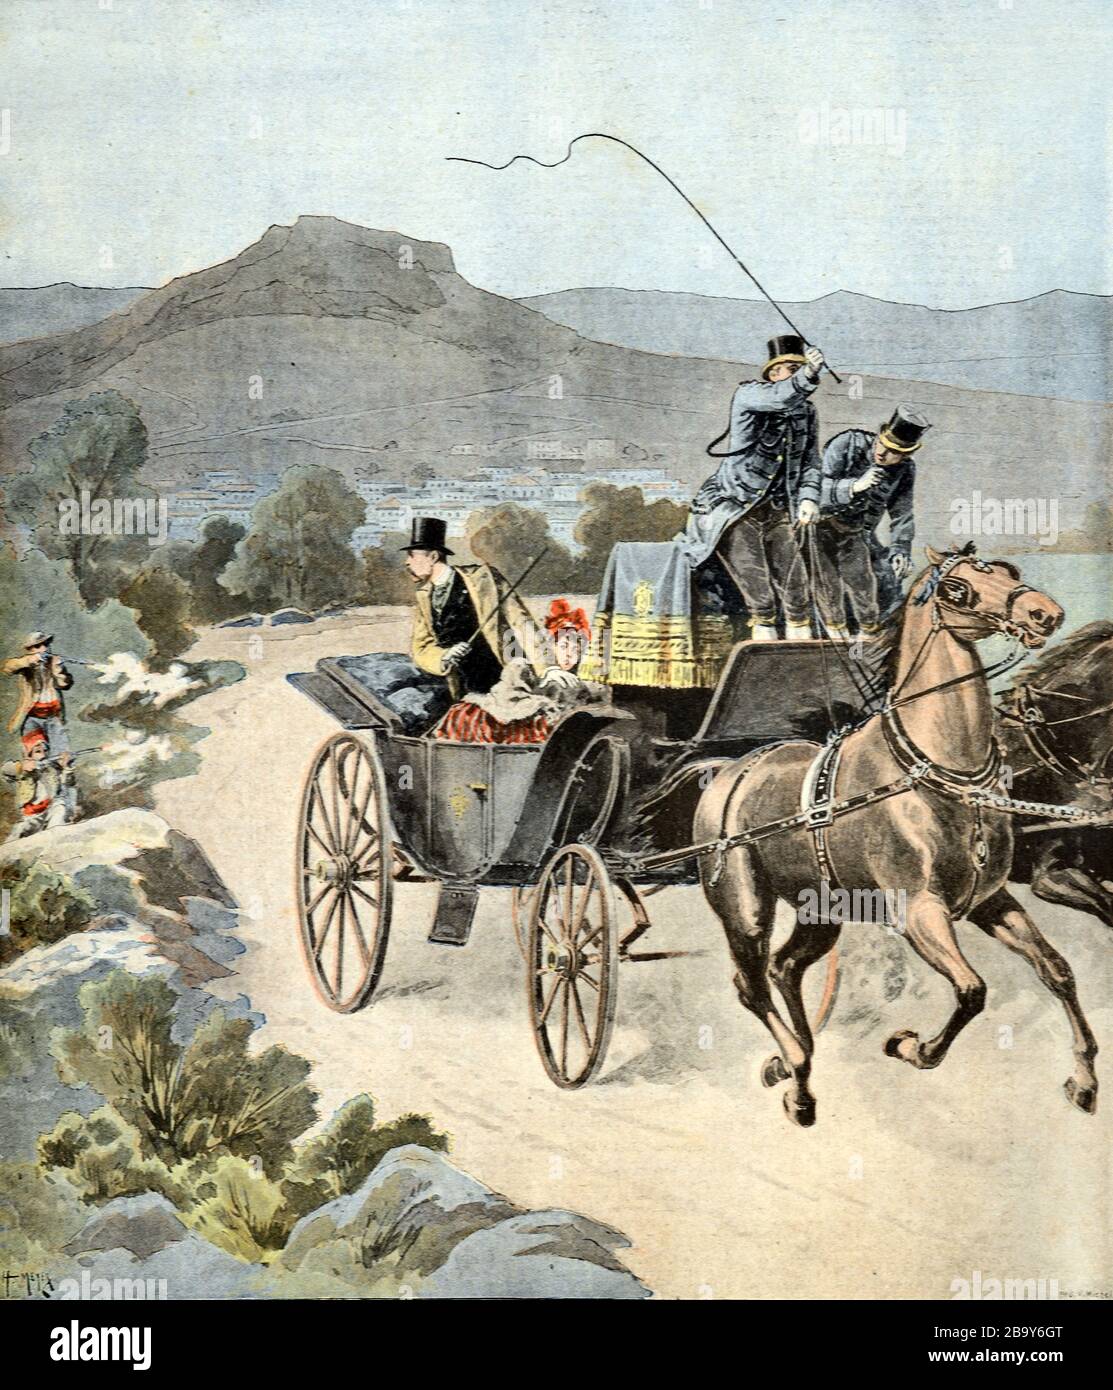 Assassination Attempt on King George I of Greece & His Daughter Maria, on 27 February 1898, while Travelling Back from Phaleron or Phalerum, south of Athens, in an Open Carriage. His assailant, an Athenian clerk named Karditzis and his accomplice were later executed. Vintage or Old Illustration. Stock Photo